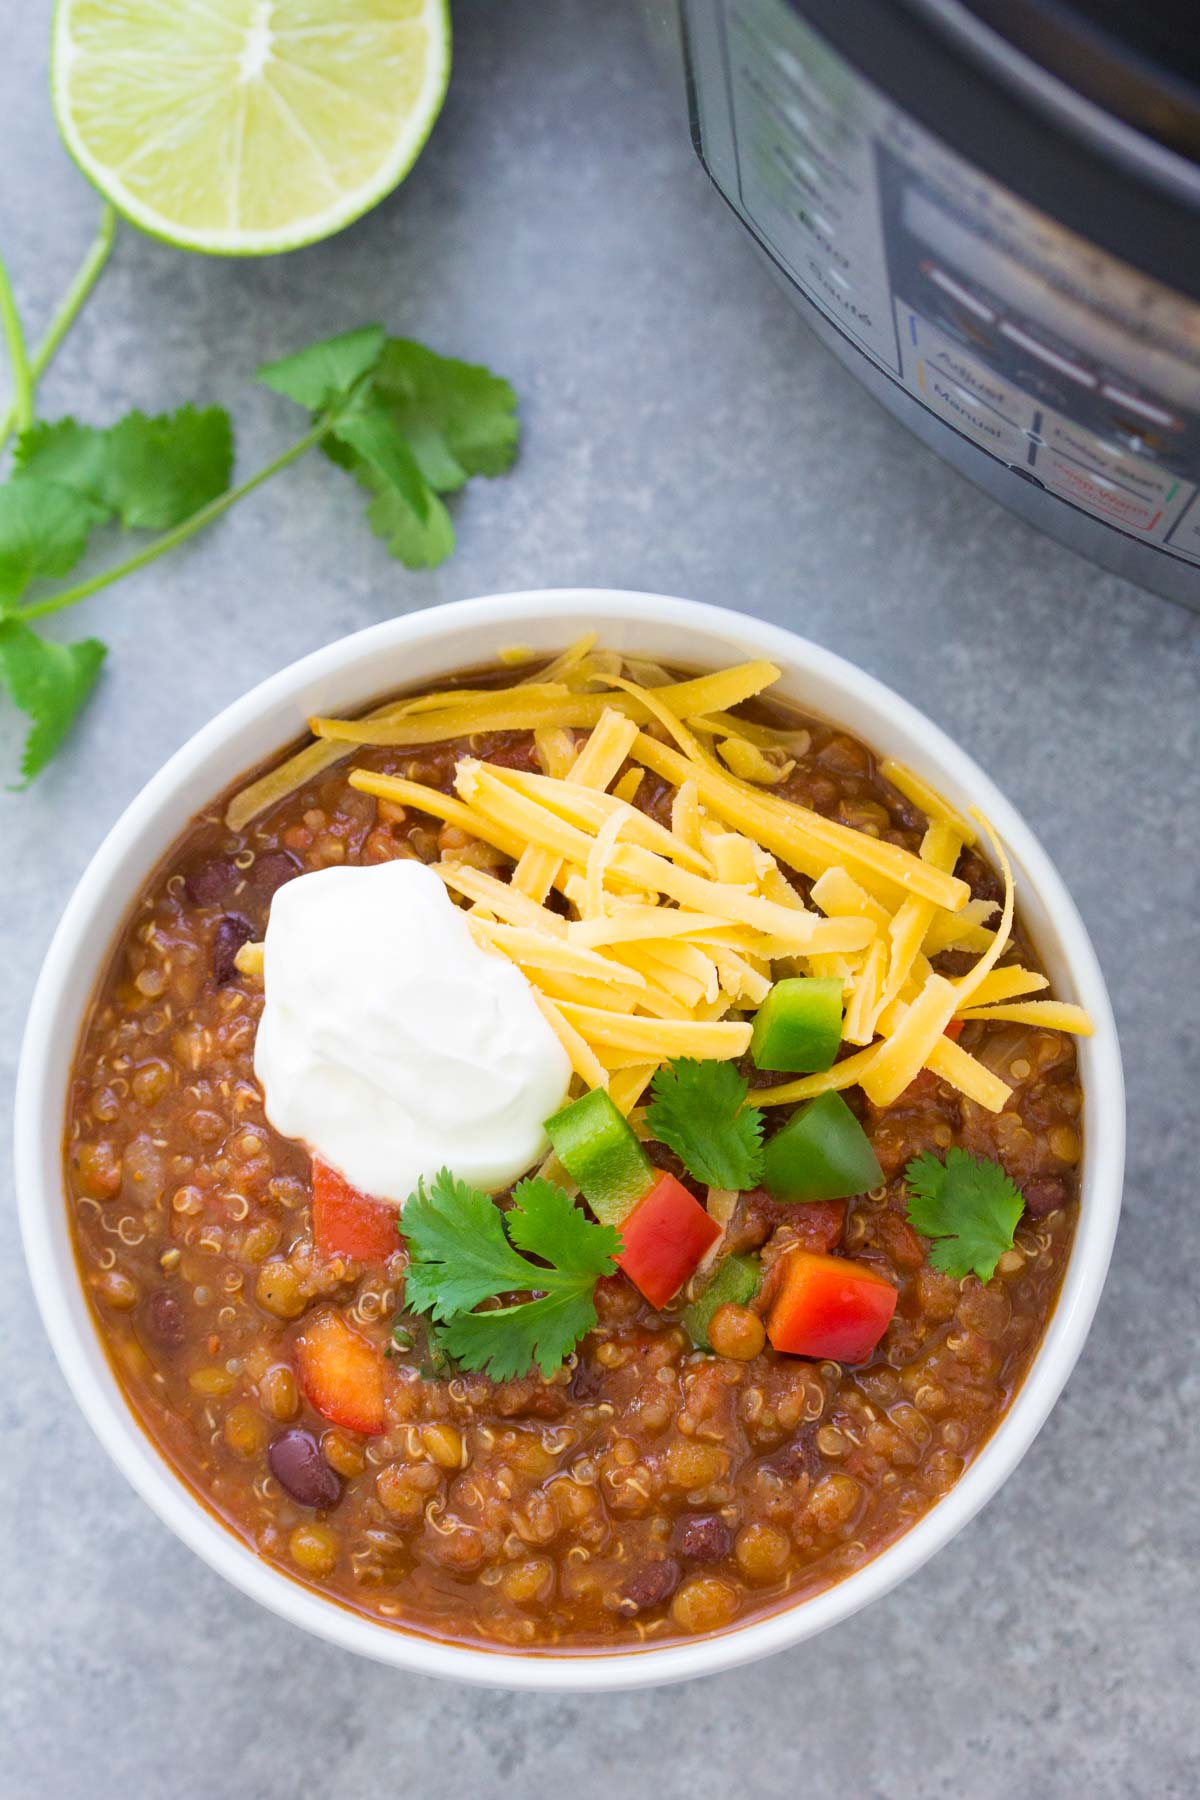 Instant pot lentil chili served in a white bowl with toppings.